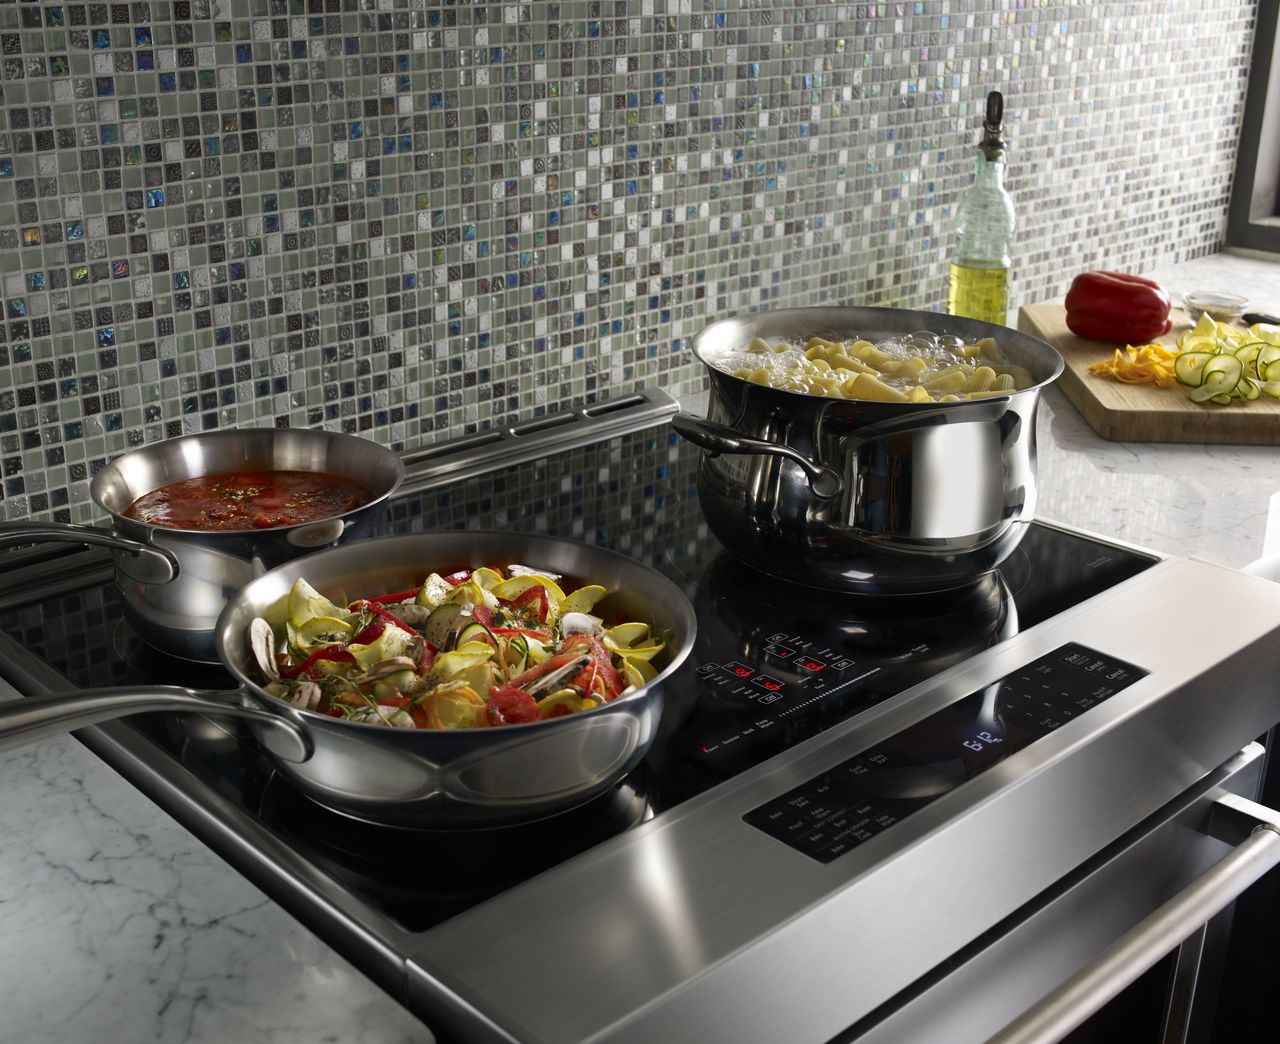 What Types of Cookware Should I Use with My Cooktop?